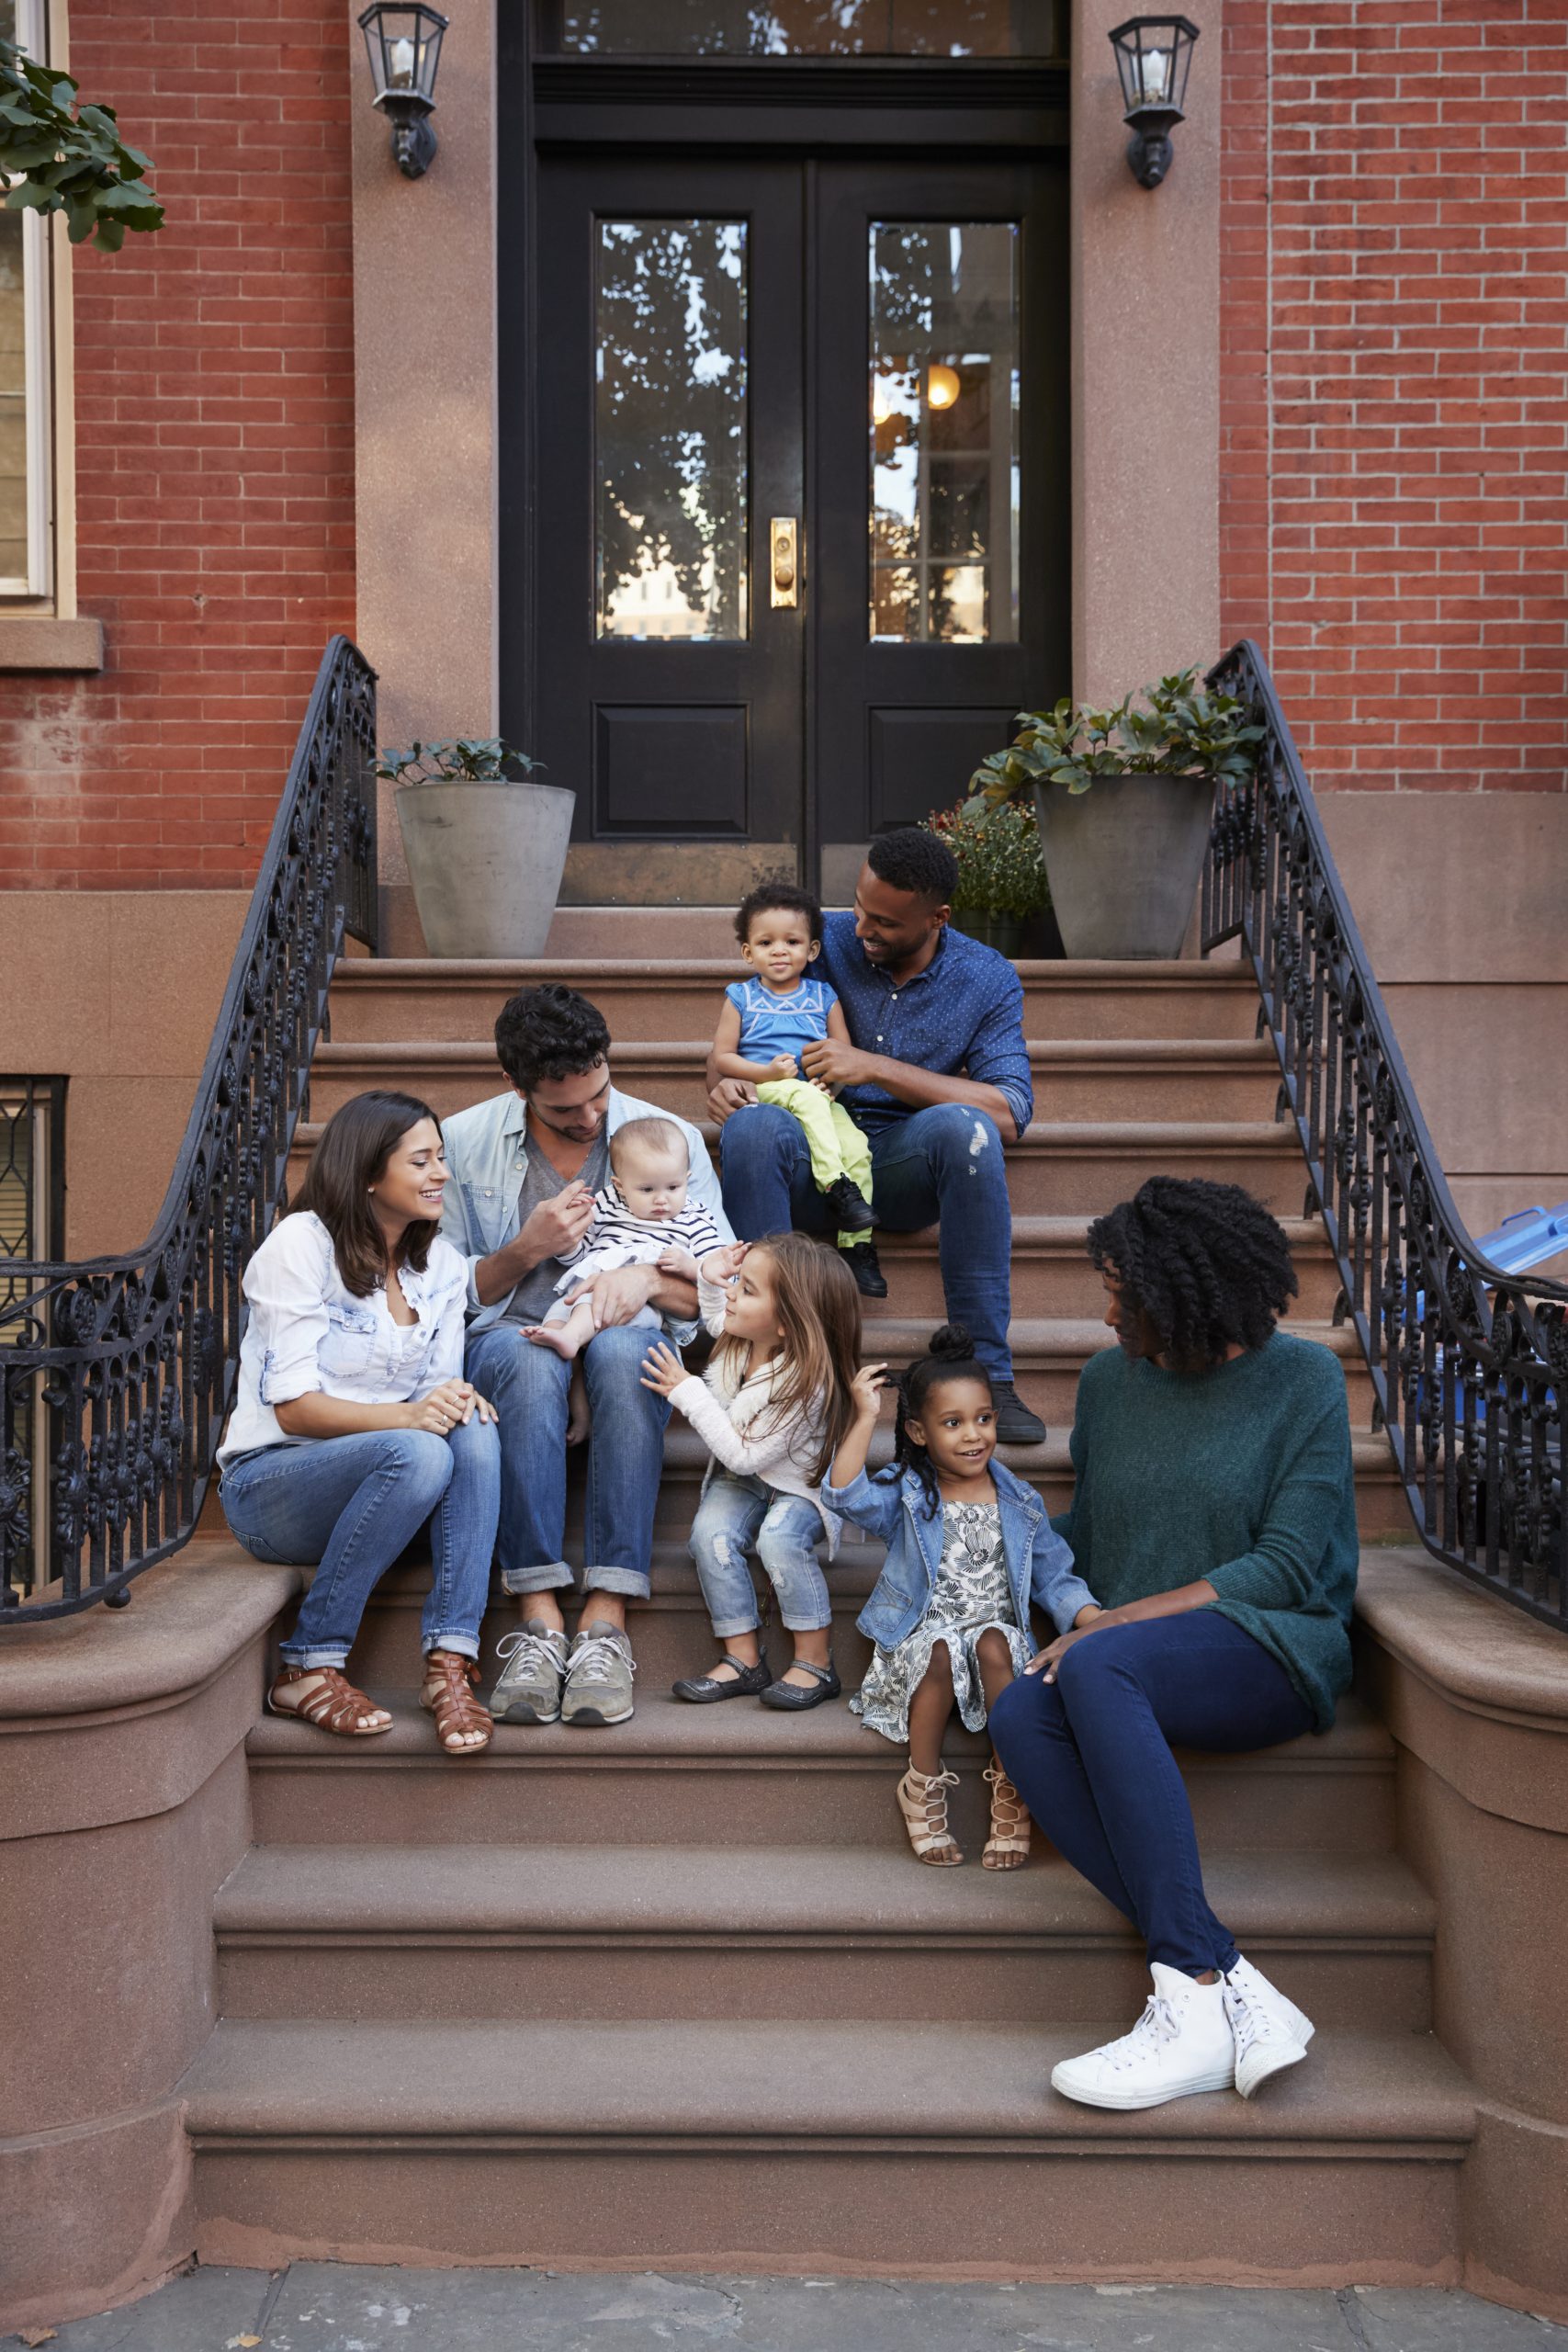 Two families with kids sitting on front stoops, vertical